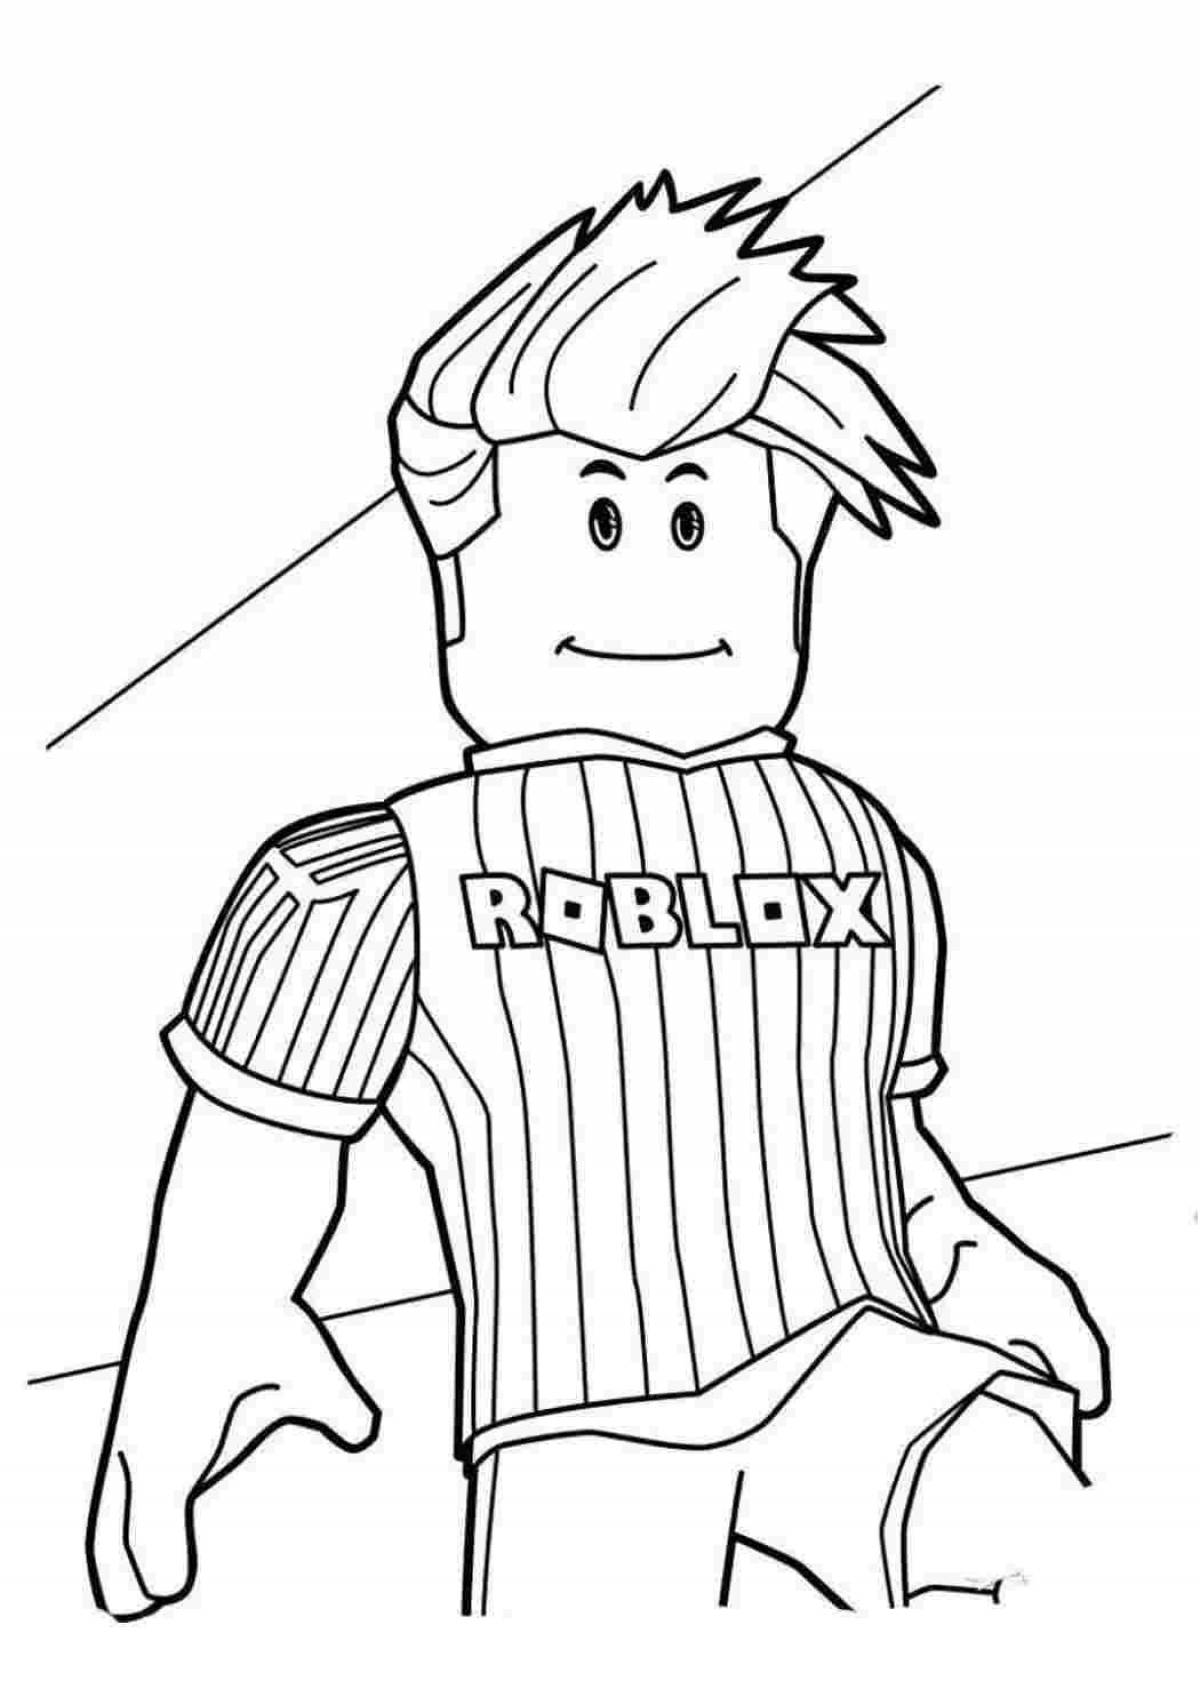 Robloxers creative coloring pages